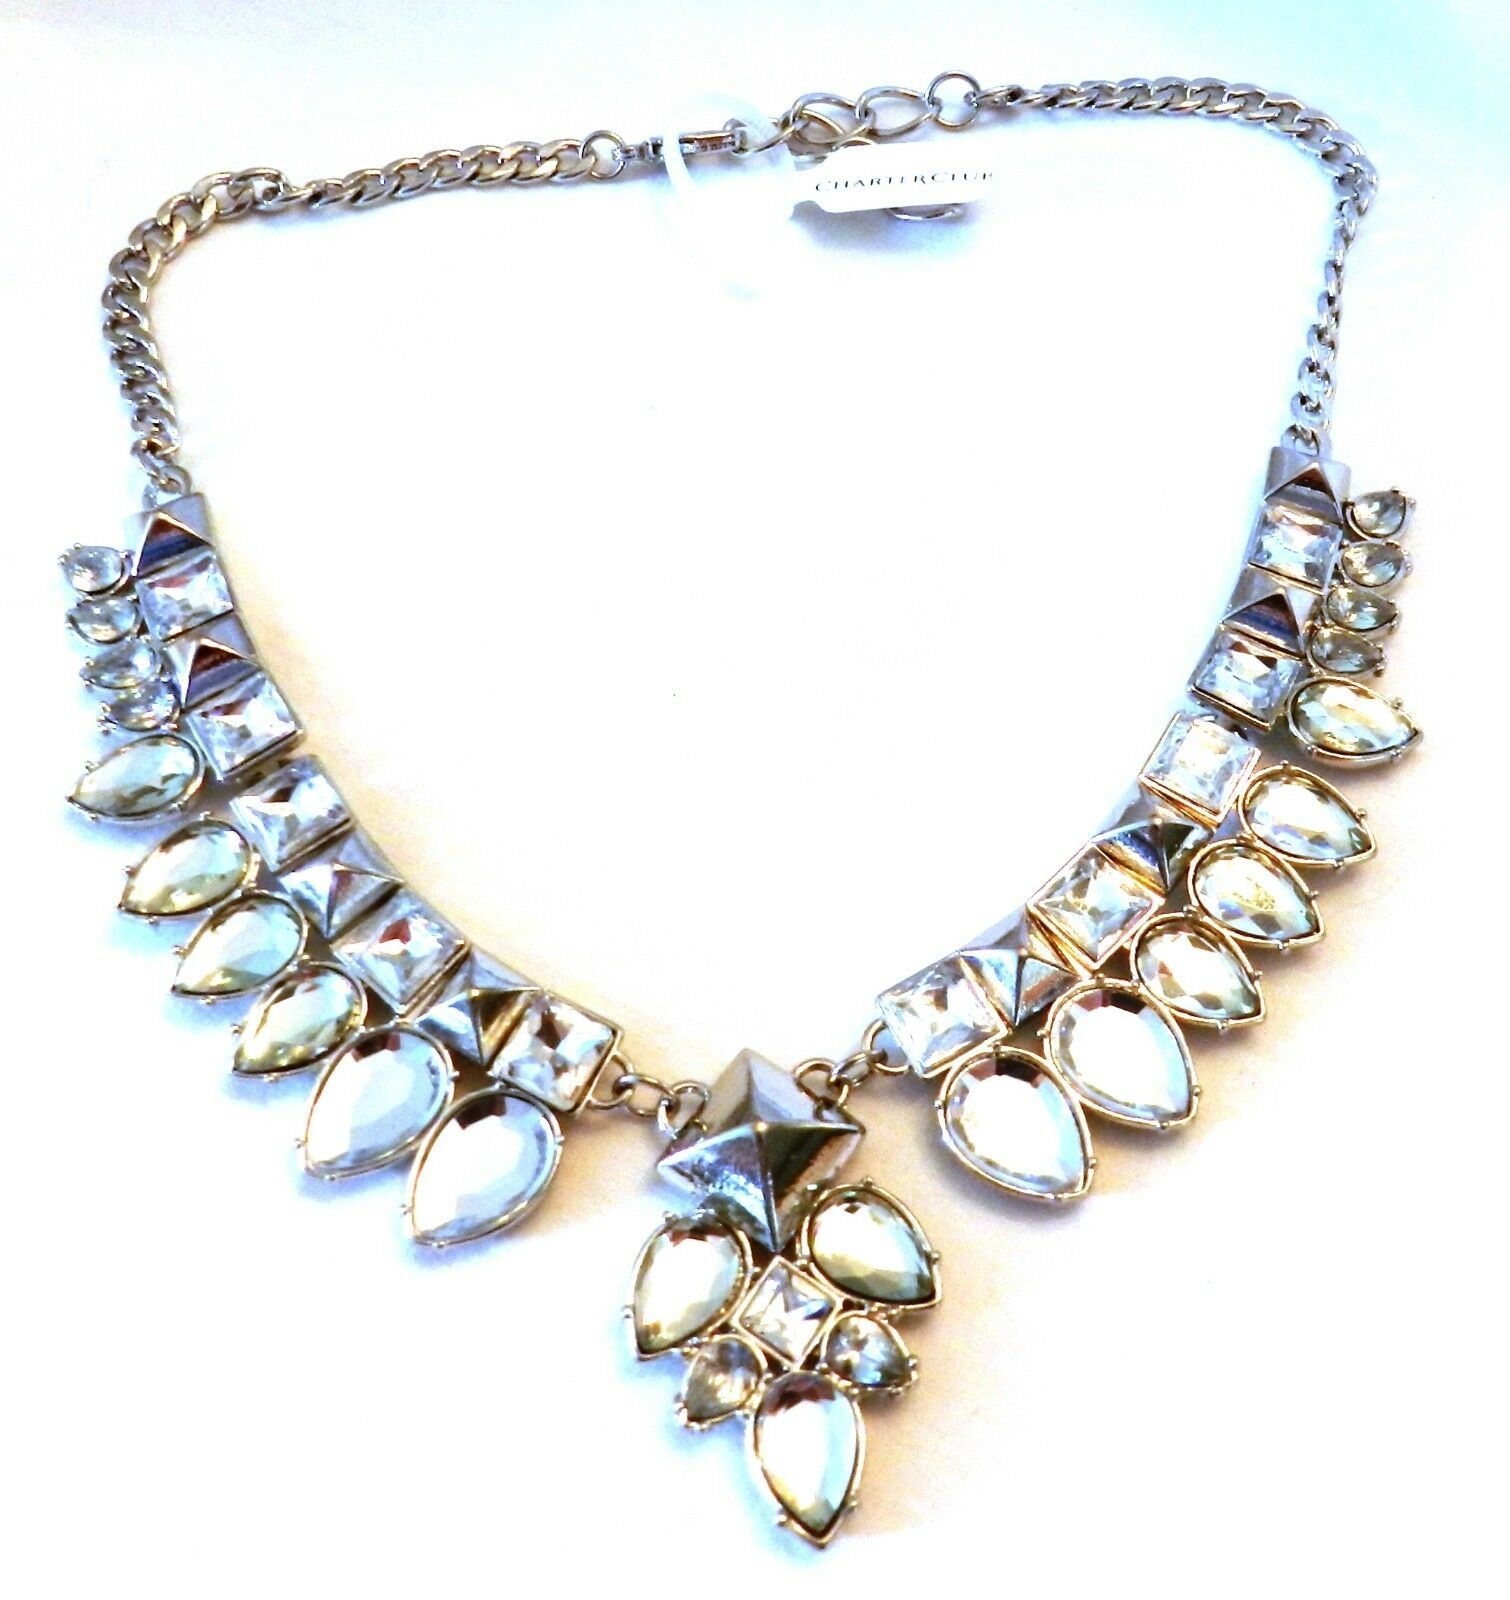 16" SILVER TONE CHUNKY PARTY BIB NECKLACE WITH LARGE STONES & HUGE CLASP - $9.99